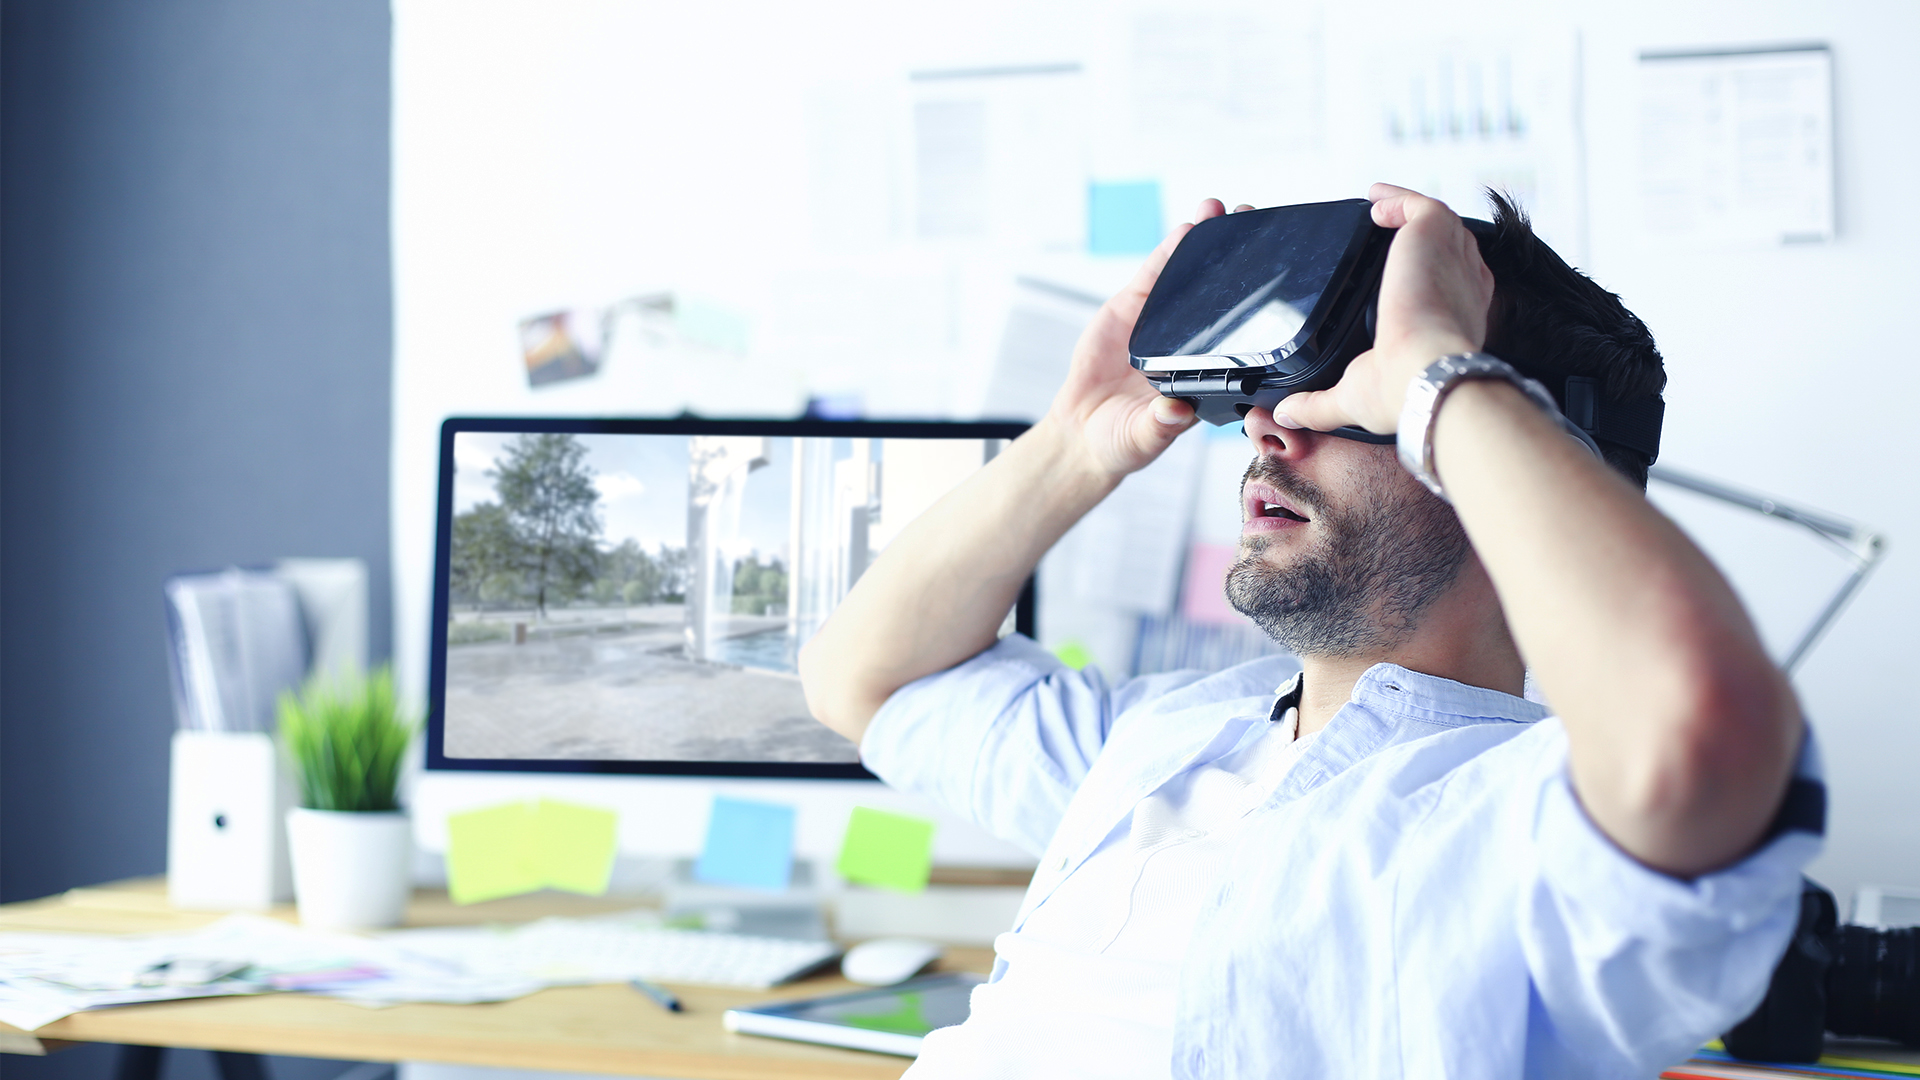 An Architect Working in a VR Headset